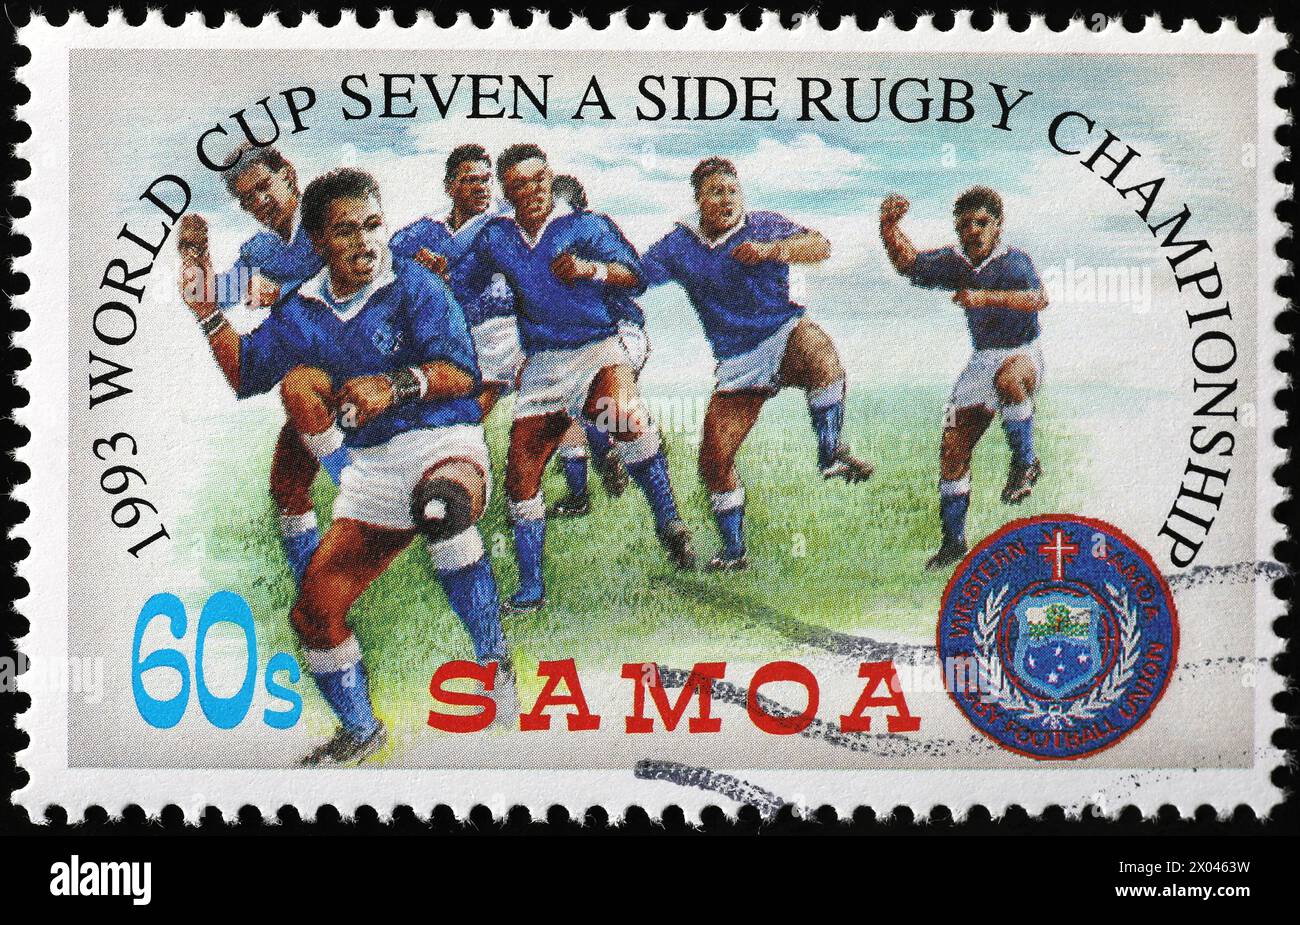 Dance of Samoan rugby players on postage stamp Stock Photo